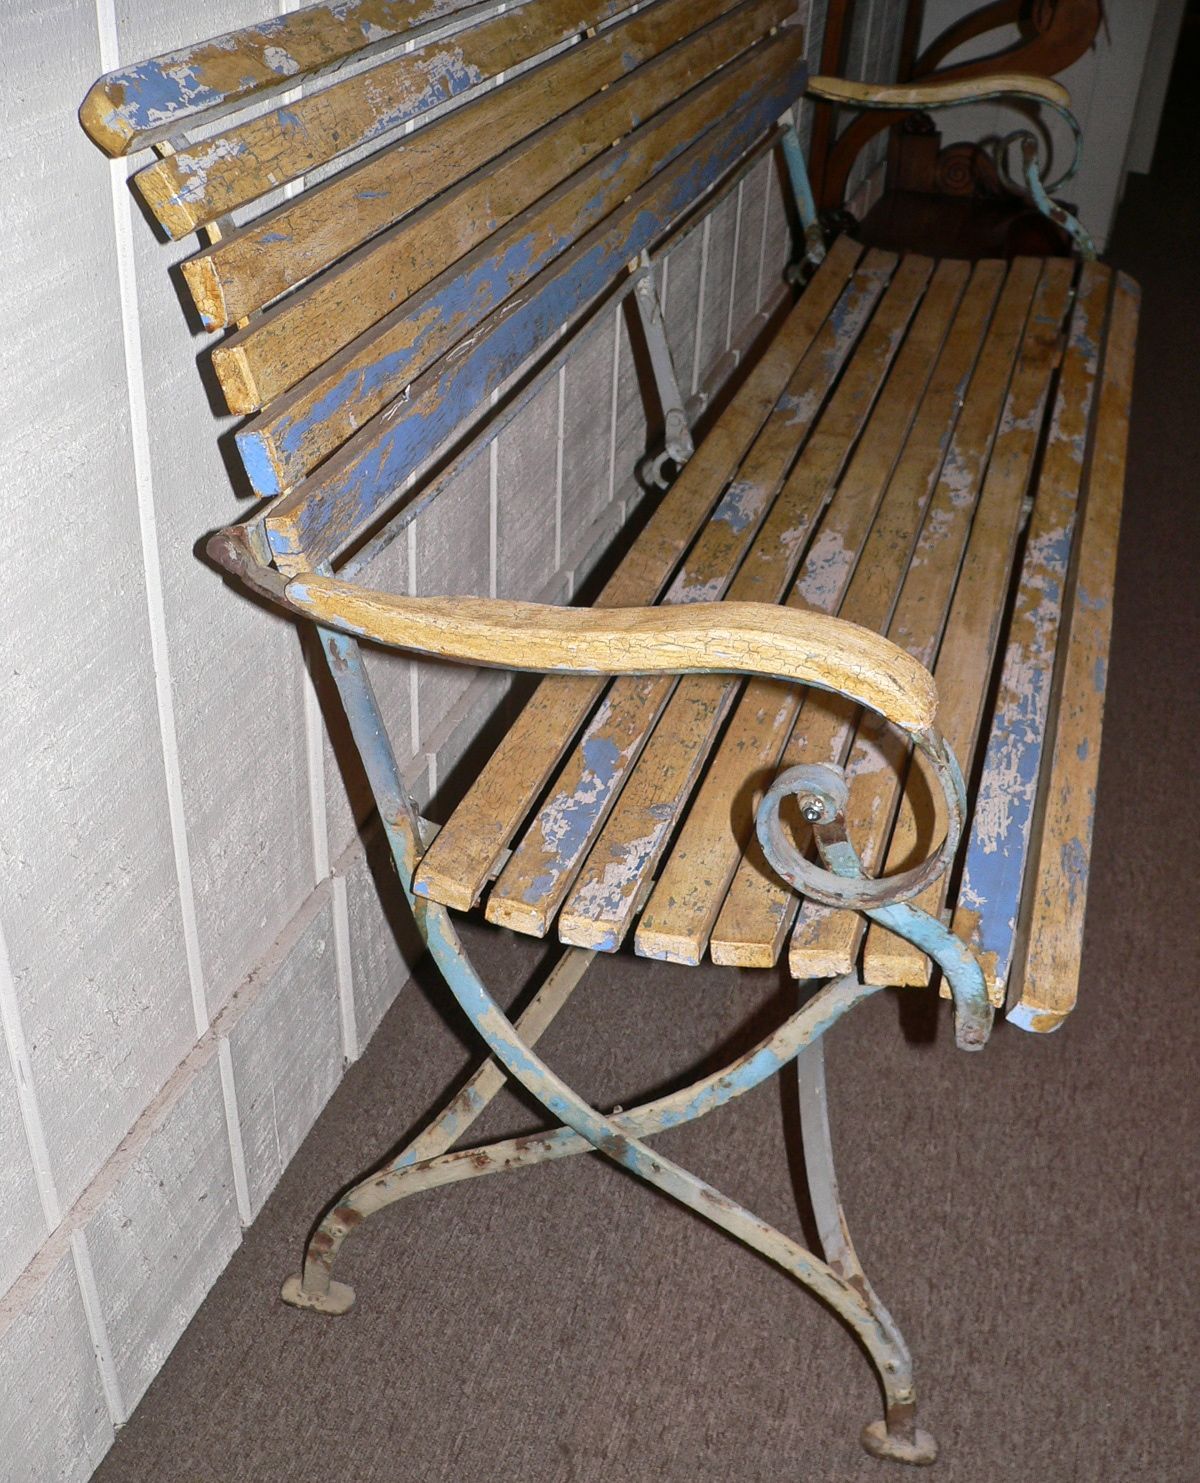 This very attractive early 20th Century slated bench has the original Provencal yellow and blue colors. It is sturdy and will fold as seen in image 3. It is great condition although I imagine it should be utilized in a covered environment.